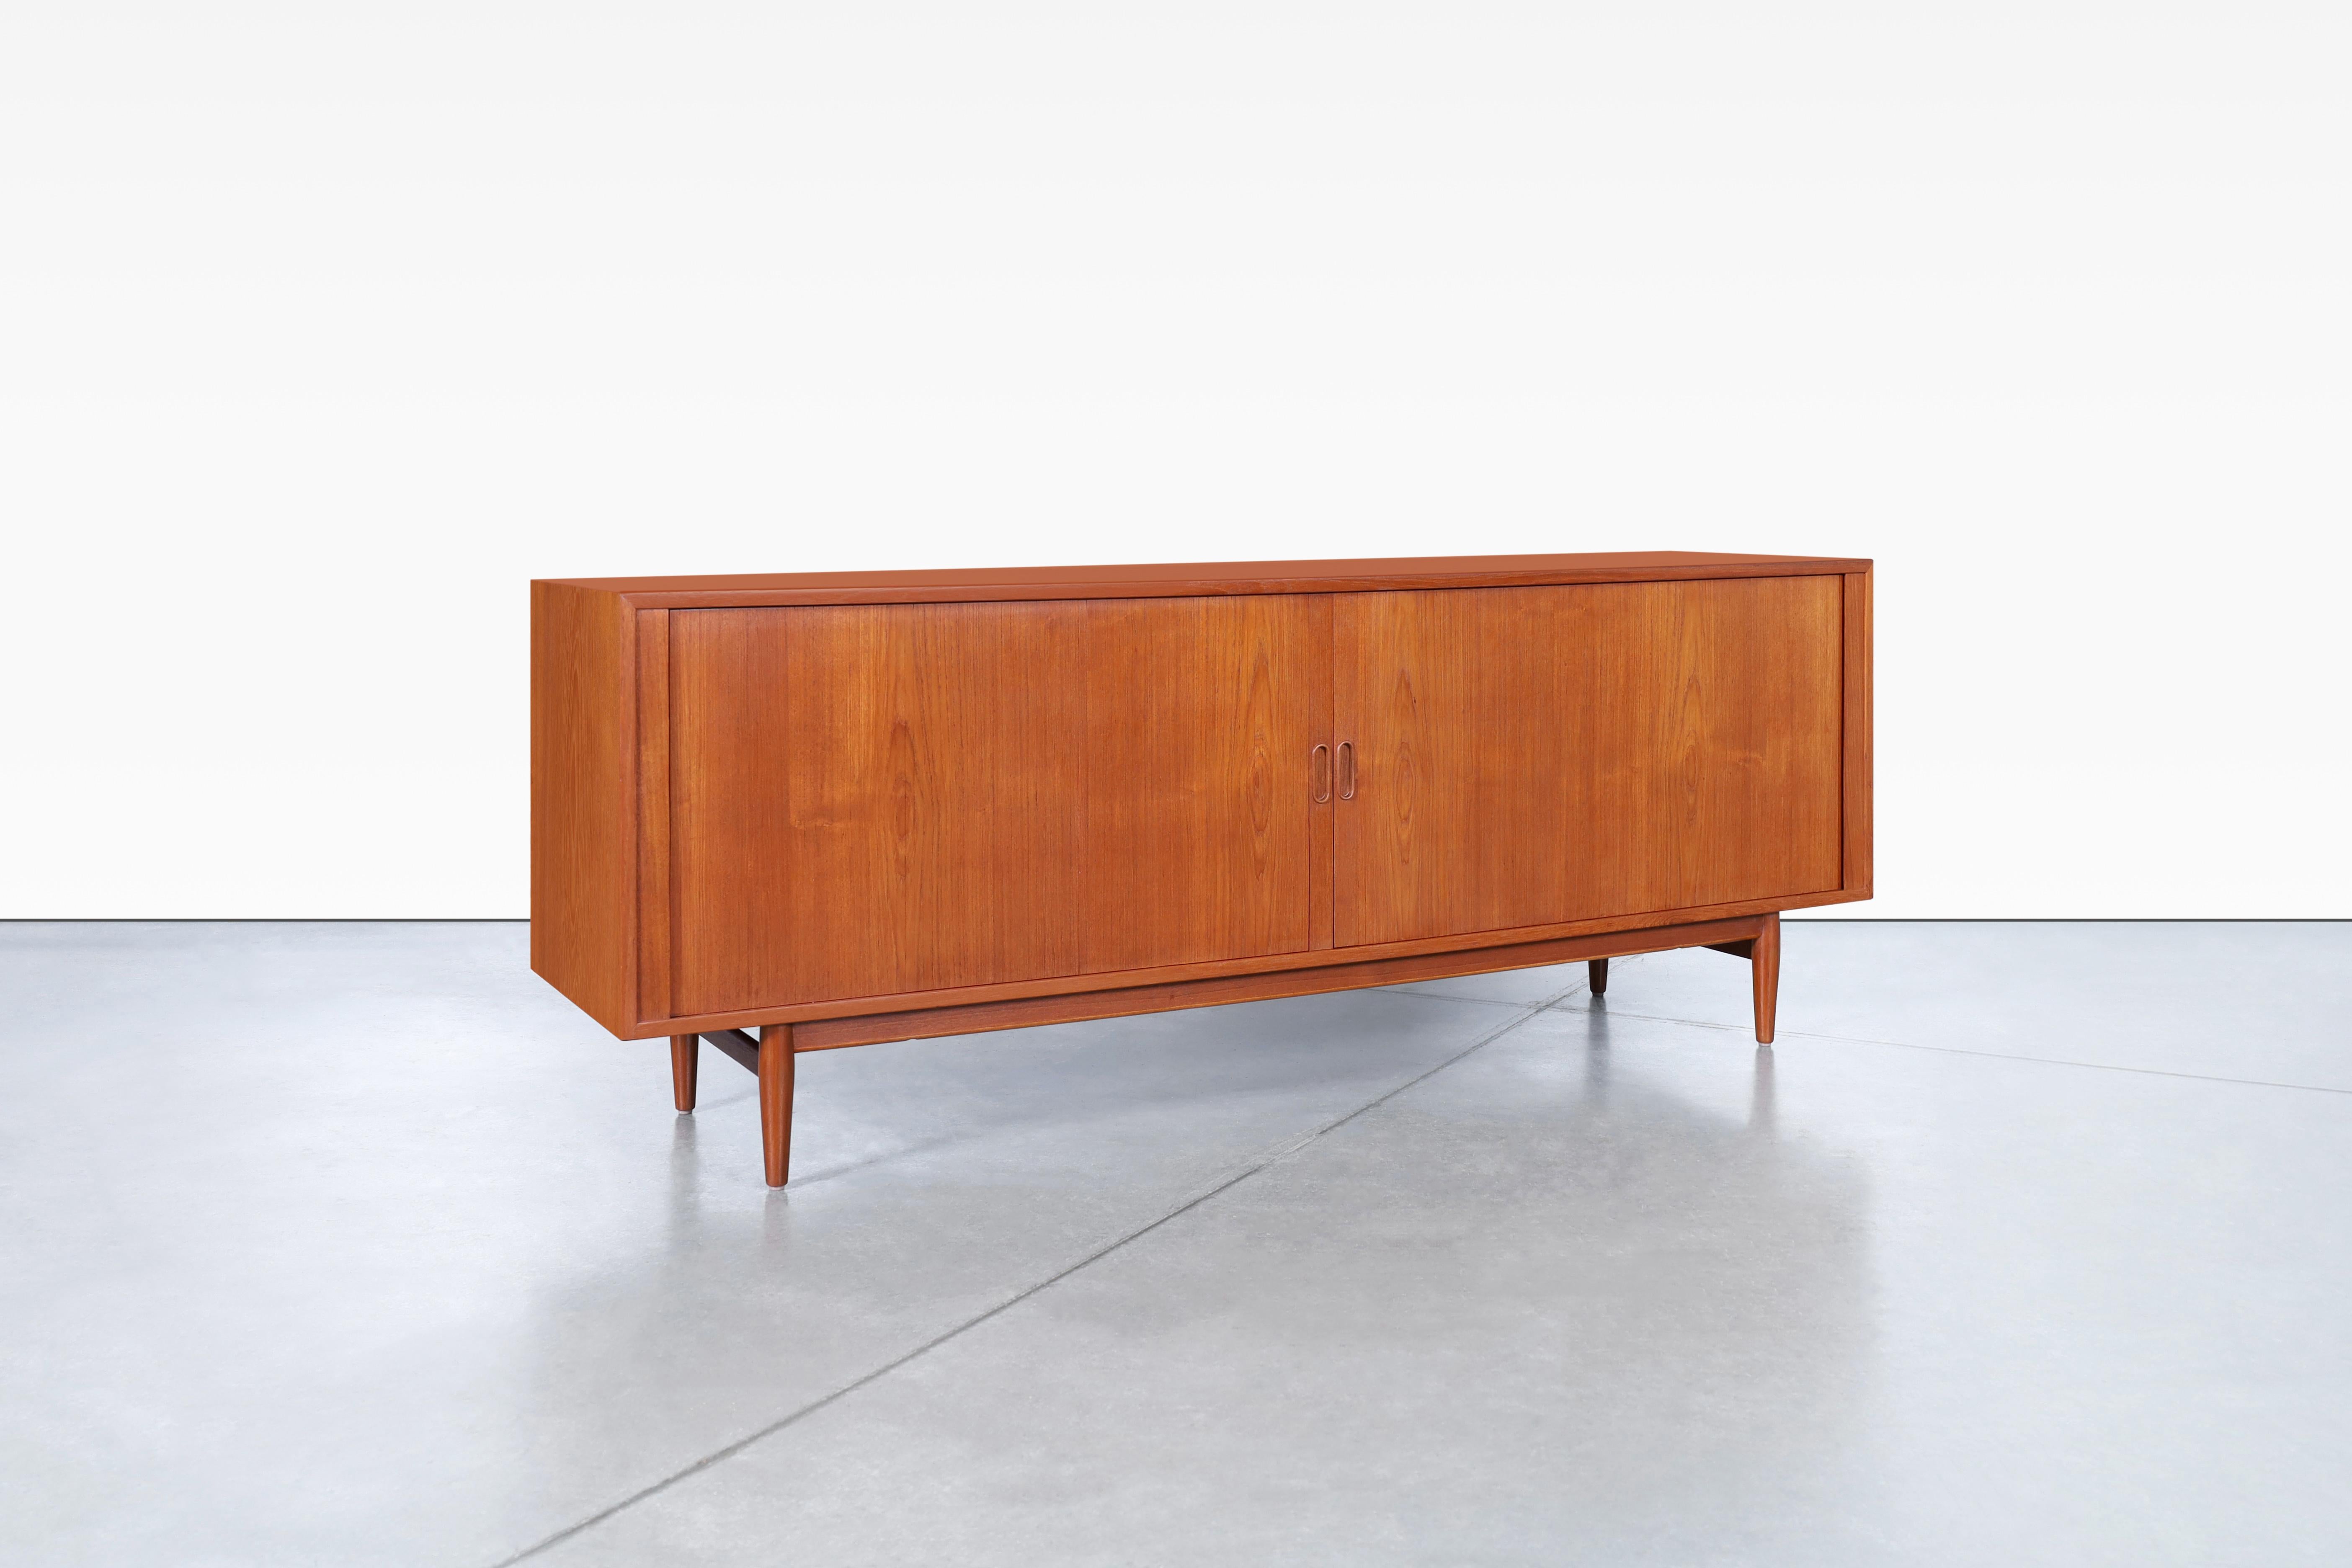 Danish modern teak tambour door credenza designed by Arne Vodder for Sibast in Denmark, circa 1950s. This teak sideboard, also known as model #37, is a masterpiece of Danish furniture design. The impeccable craftsmanship is evident in every detail,